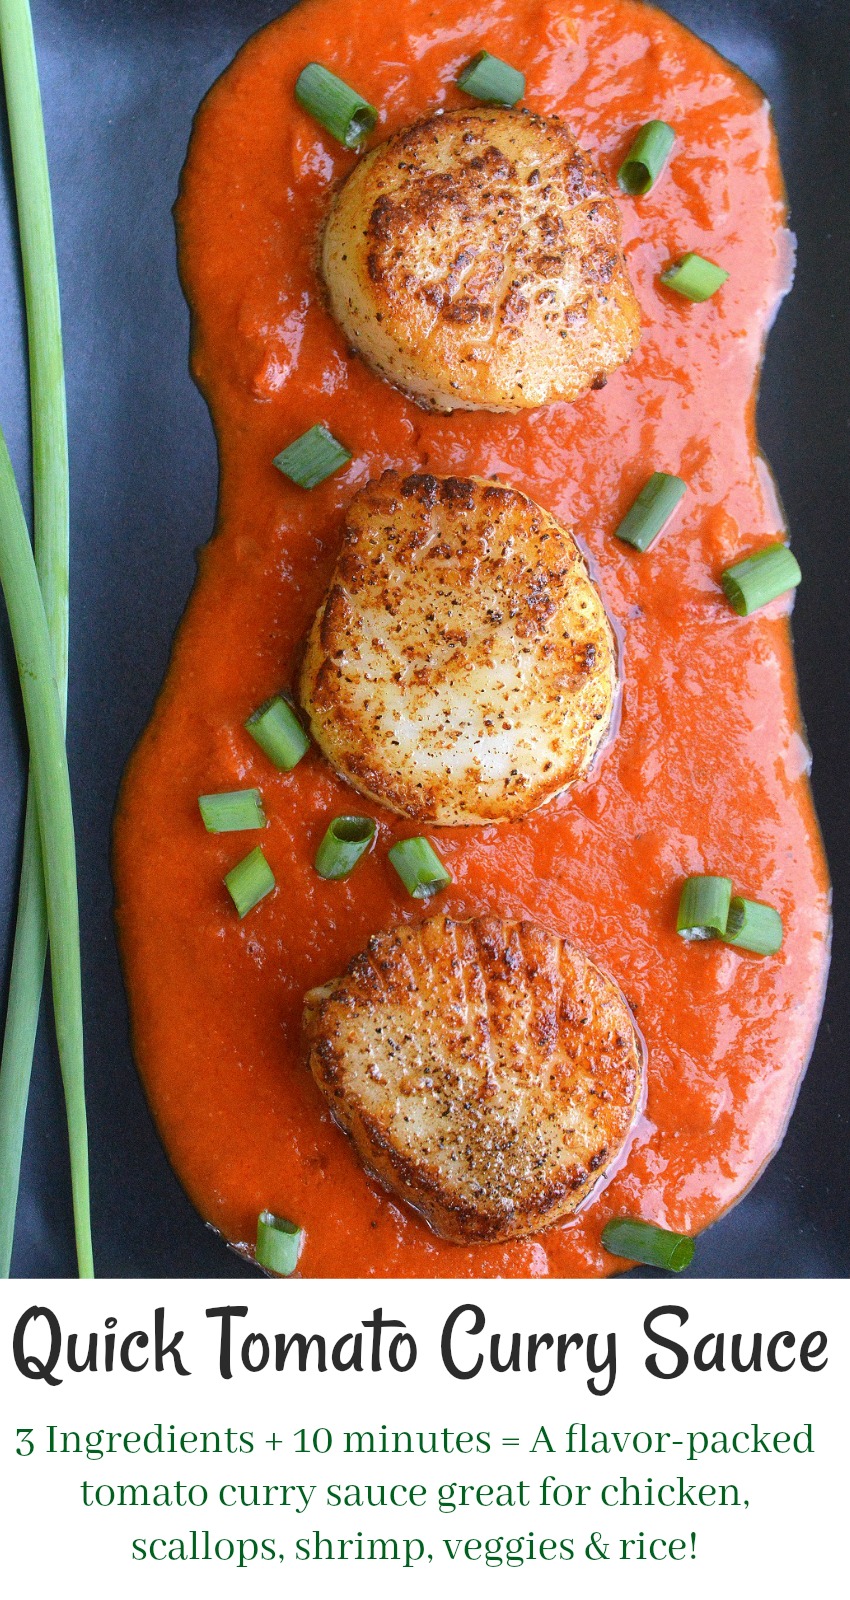 Seared Scallops in a quick, flavorful Thai Curry - Unbelievable flavor, fast!